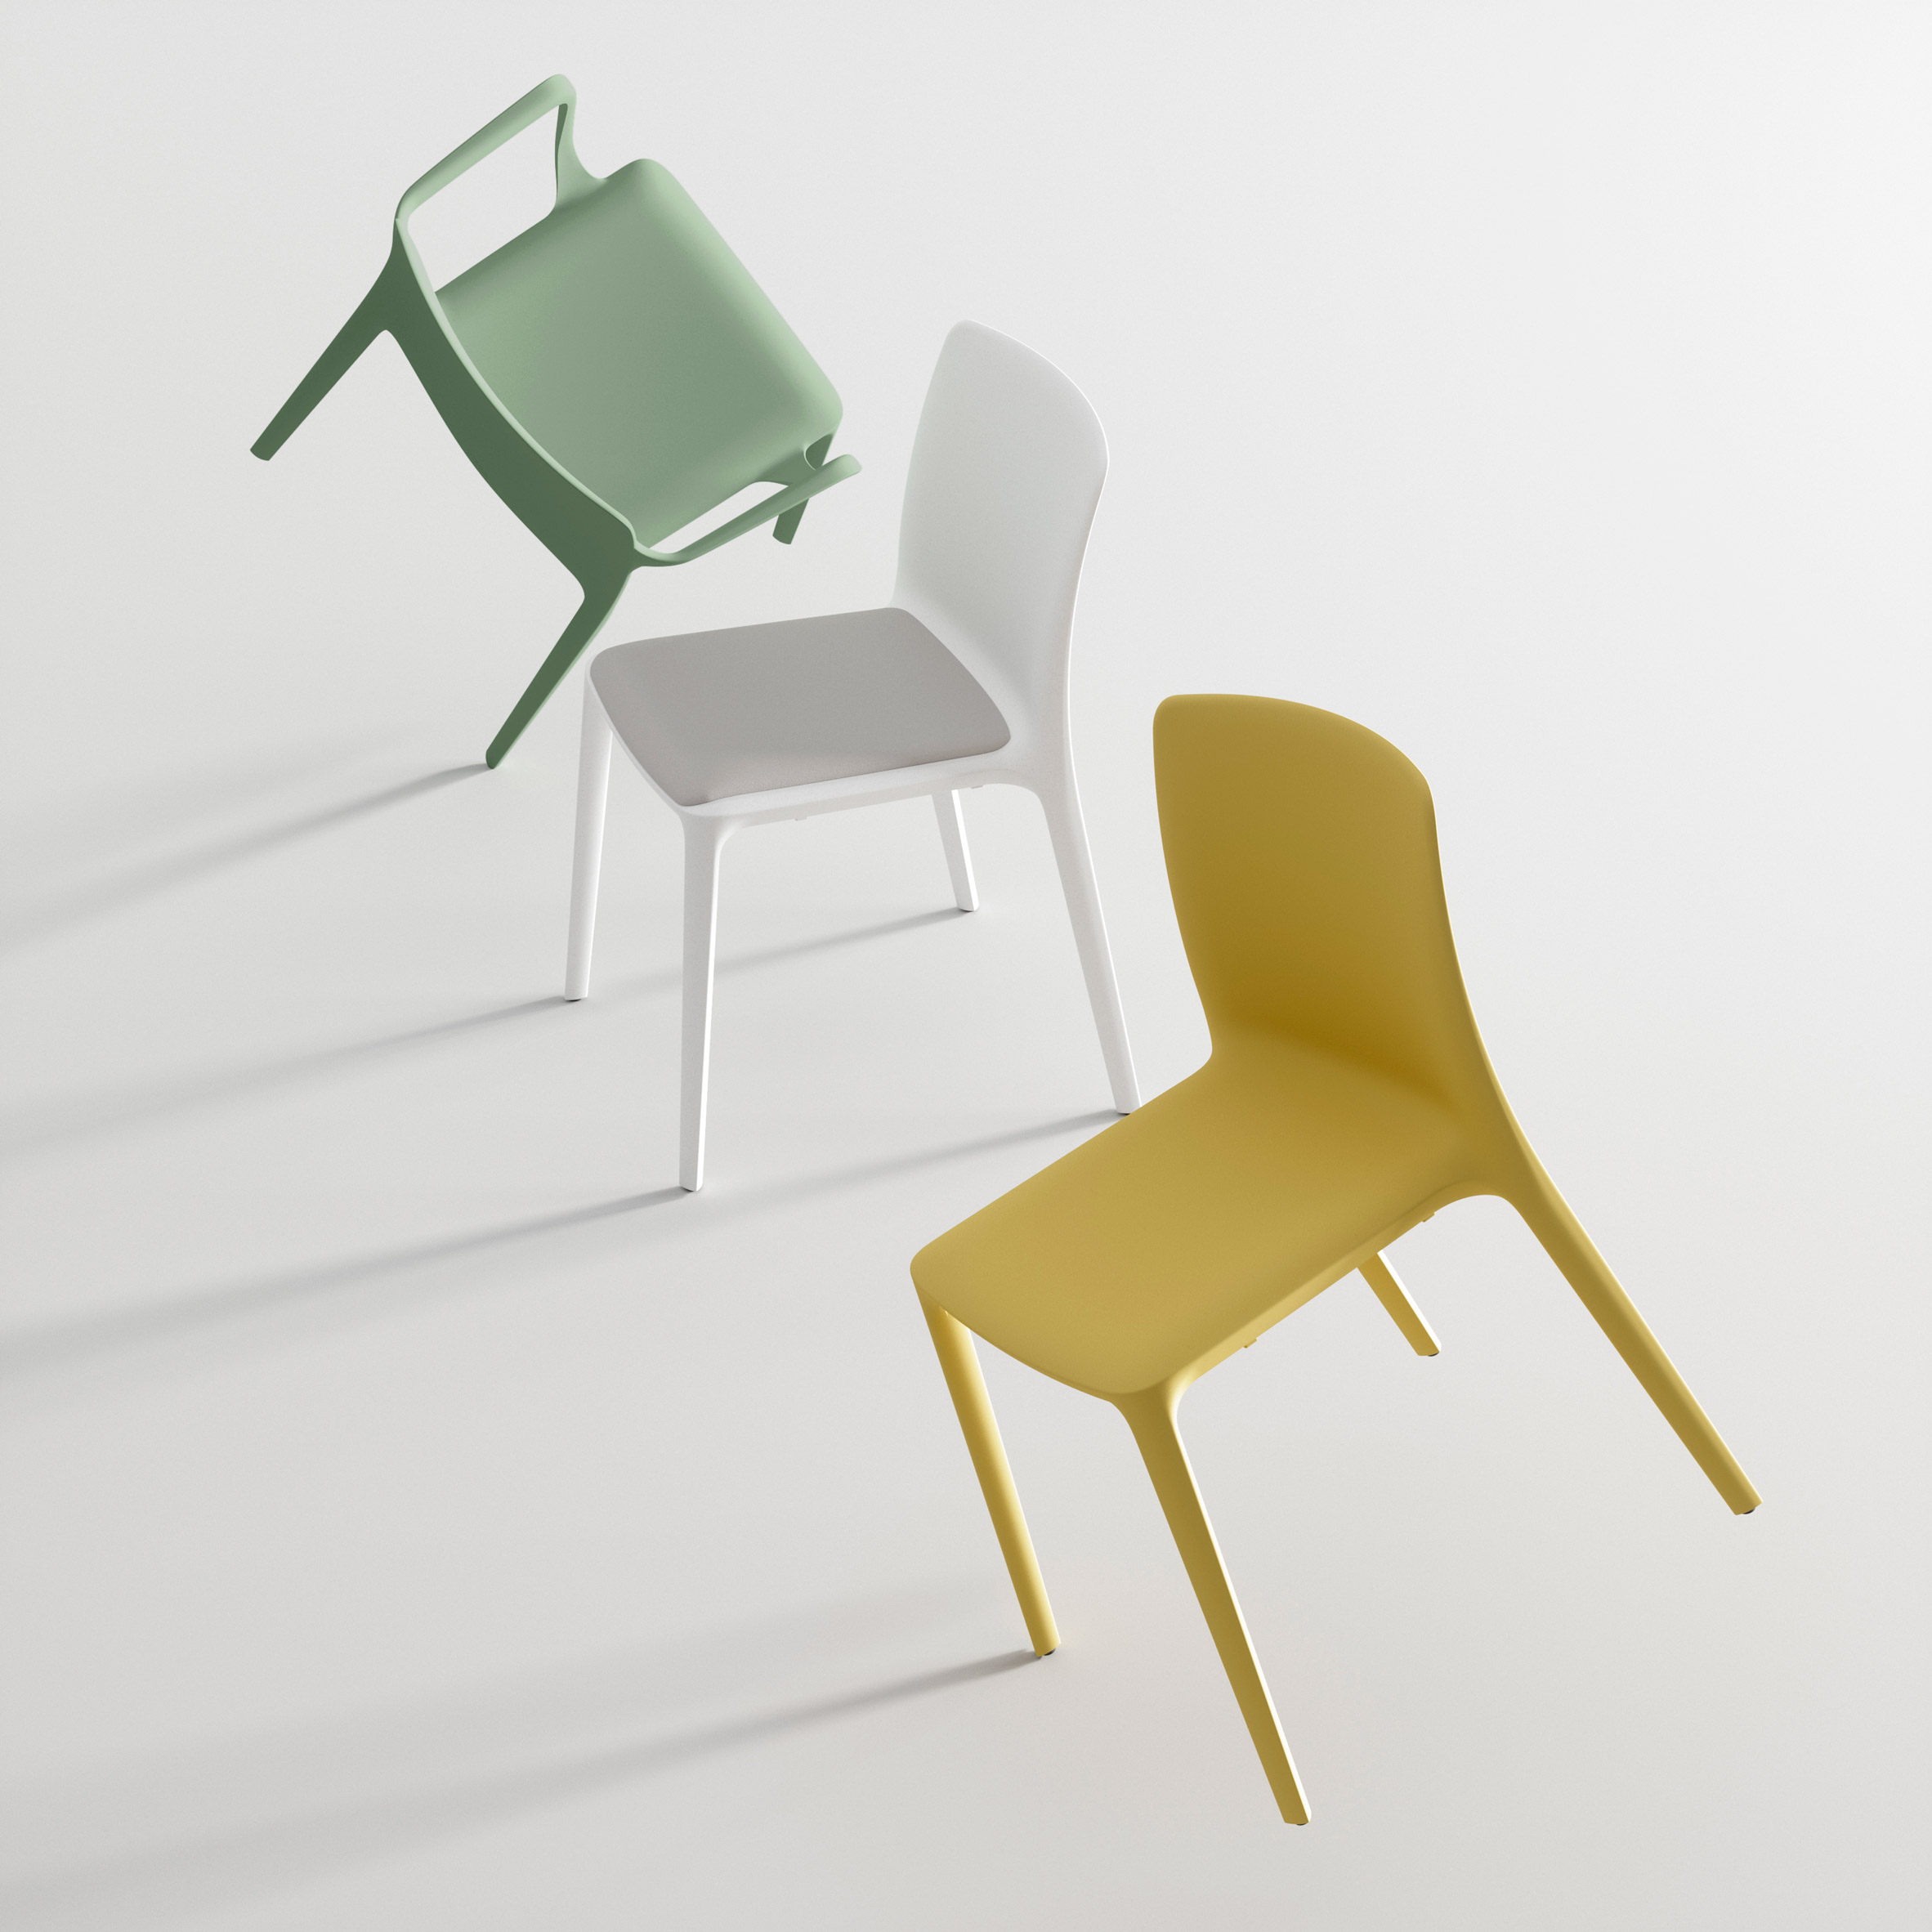 green, white and yellow actiu chairs with and without armrests